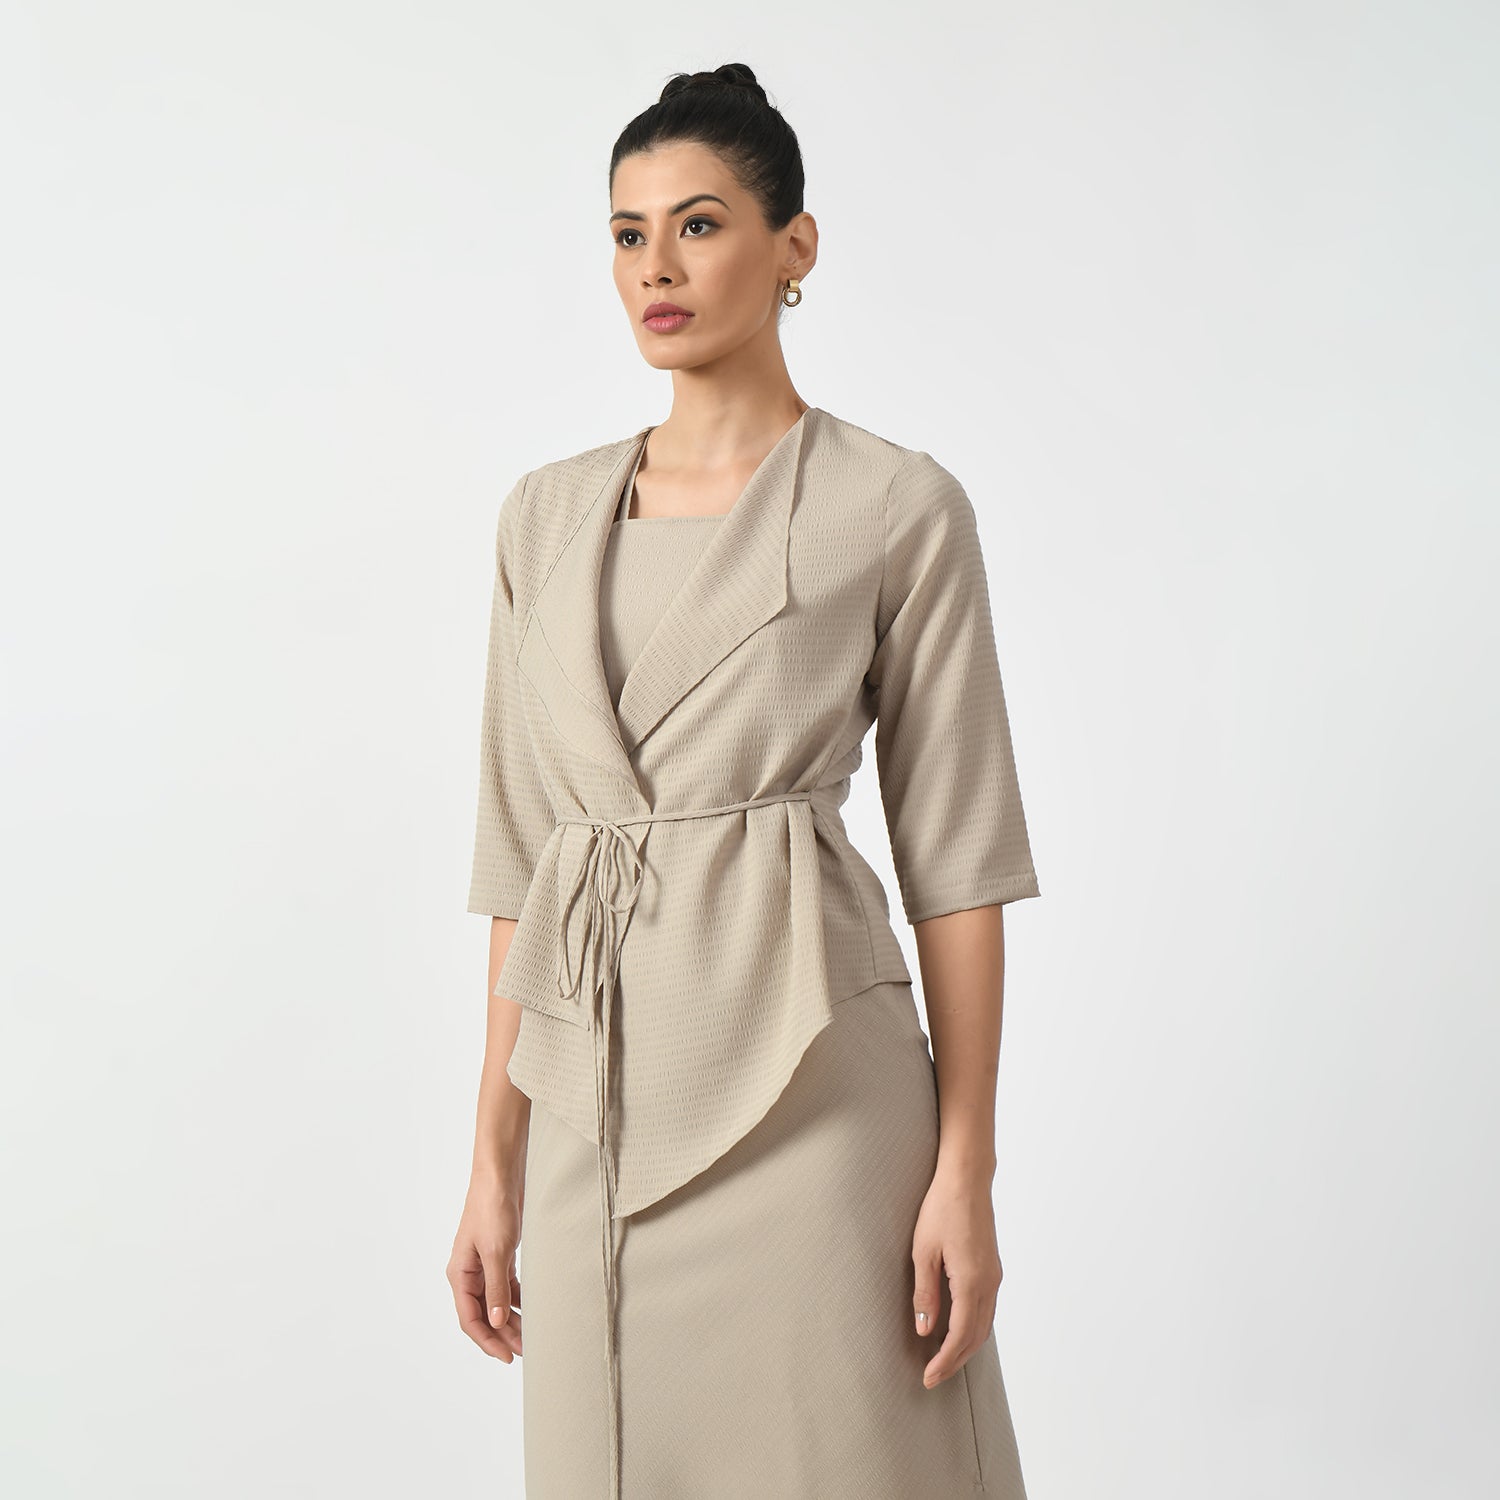 Beige Texture Jacket With Wrap And Tie Knot